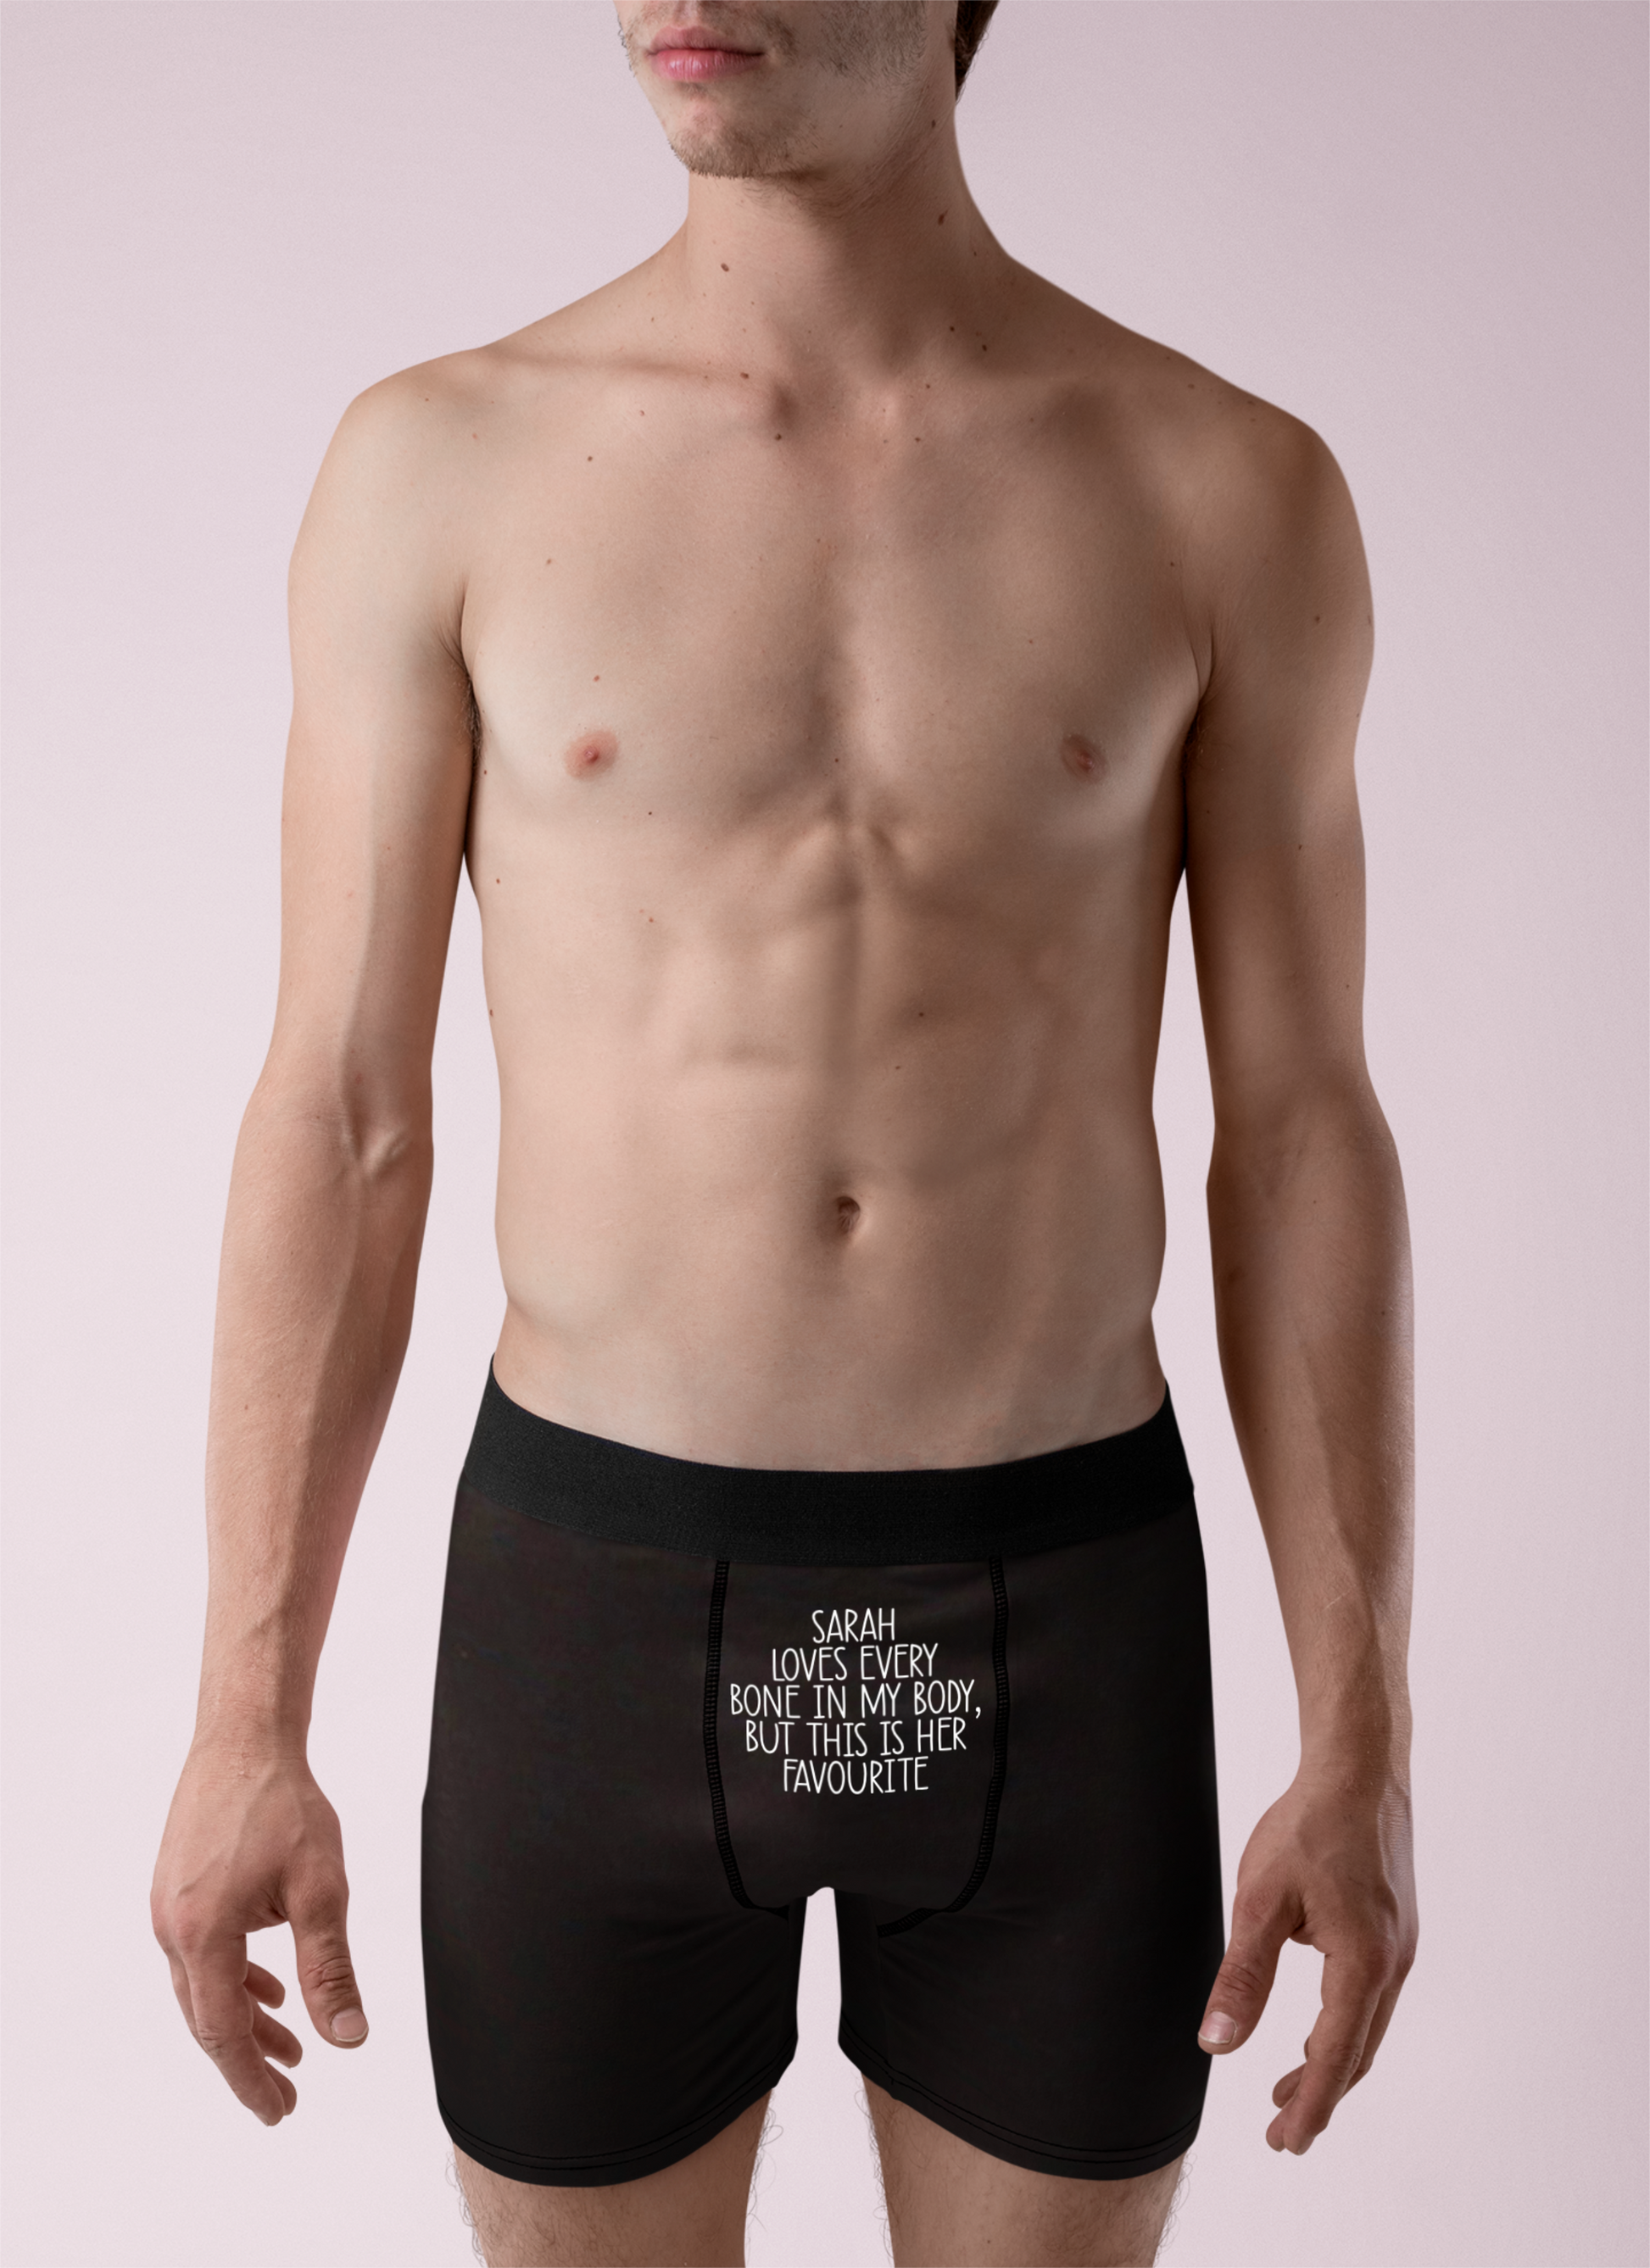 Black pair of mens boxer short pants with a white funny quote to the top middle section. It reads '(name) loves every bone in my body... but this is her favourite'.